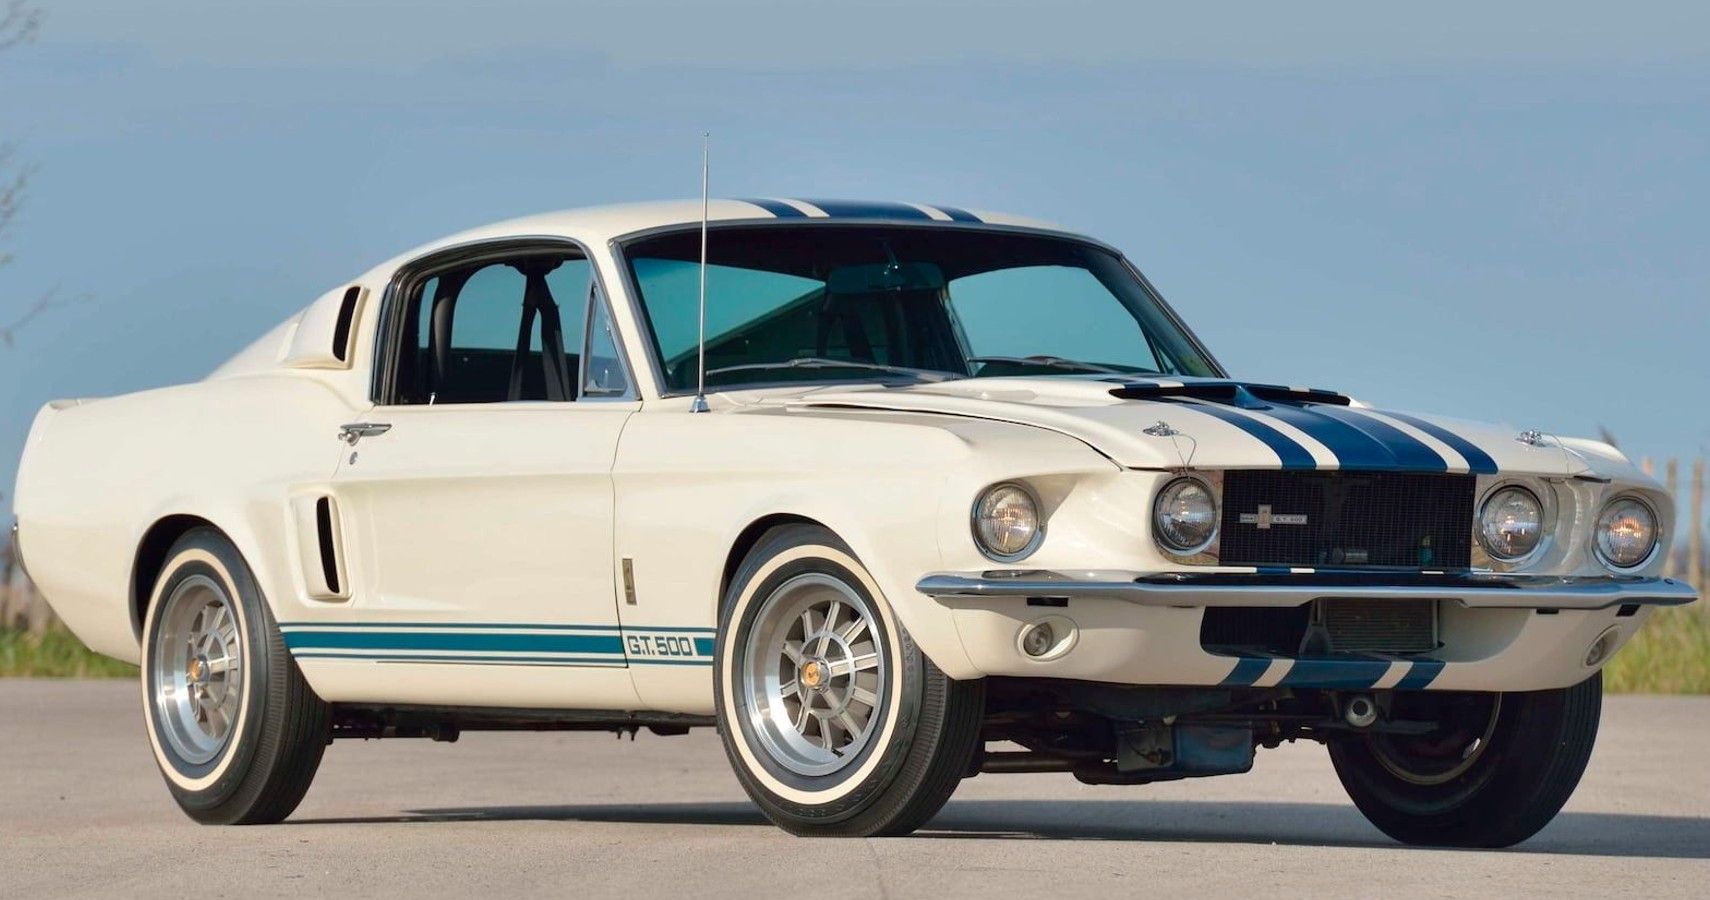 10 Classic American Cars That Had The Most Powerful Engines